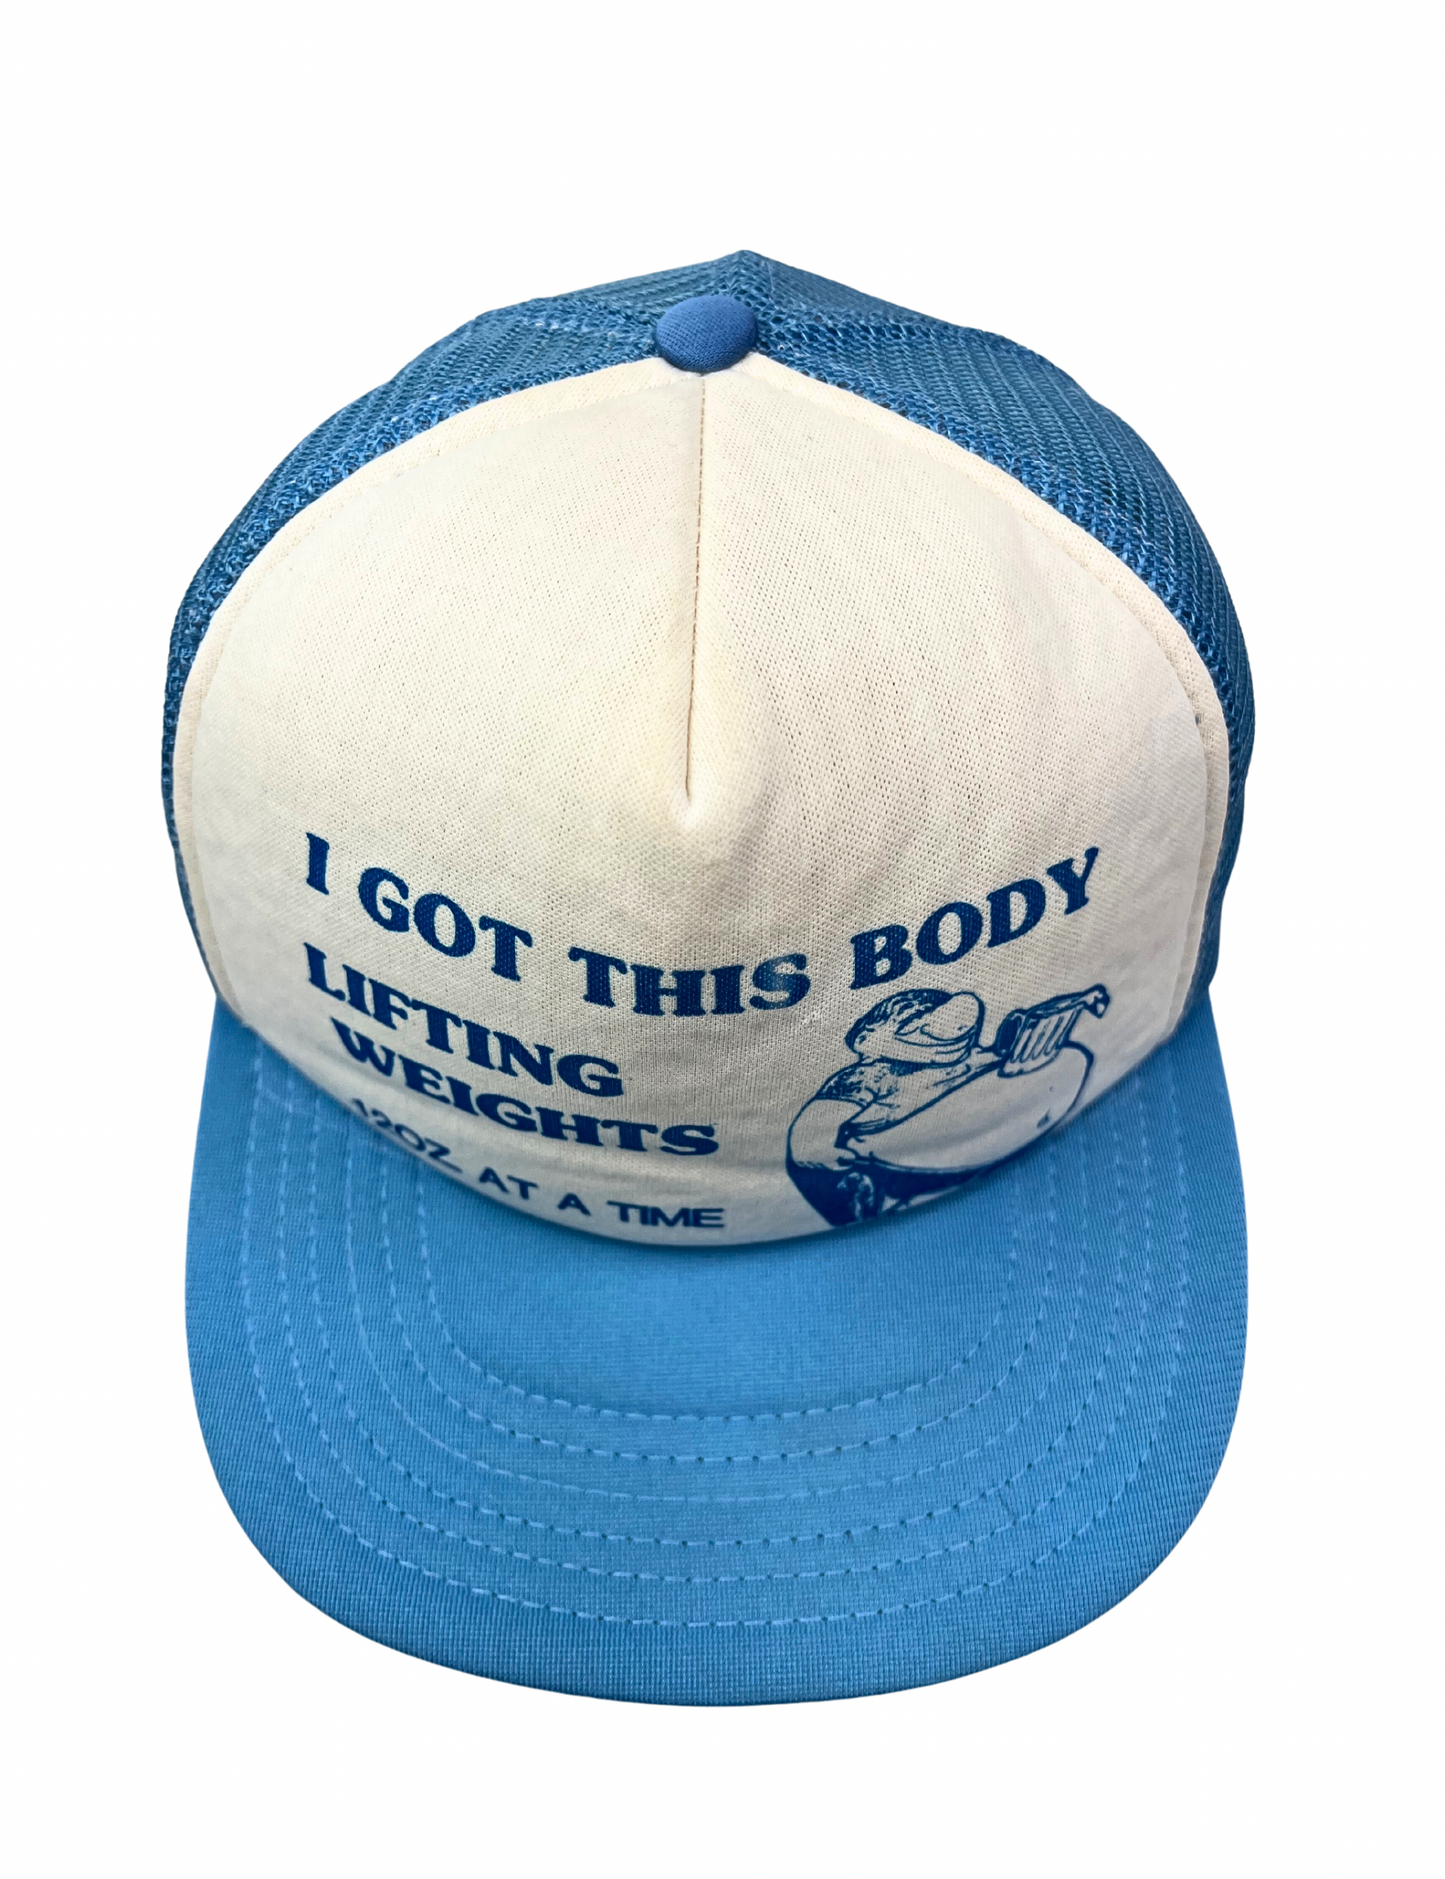 80’s I Got This Body Lifting Weights 12oz at a Time Hat